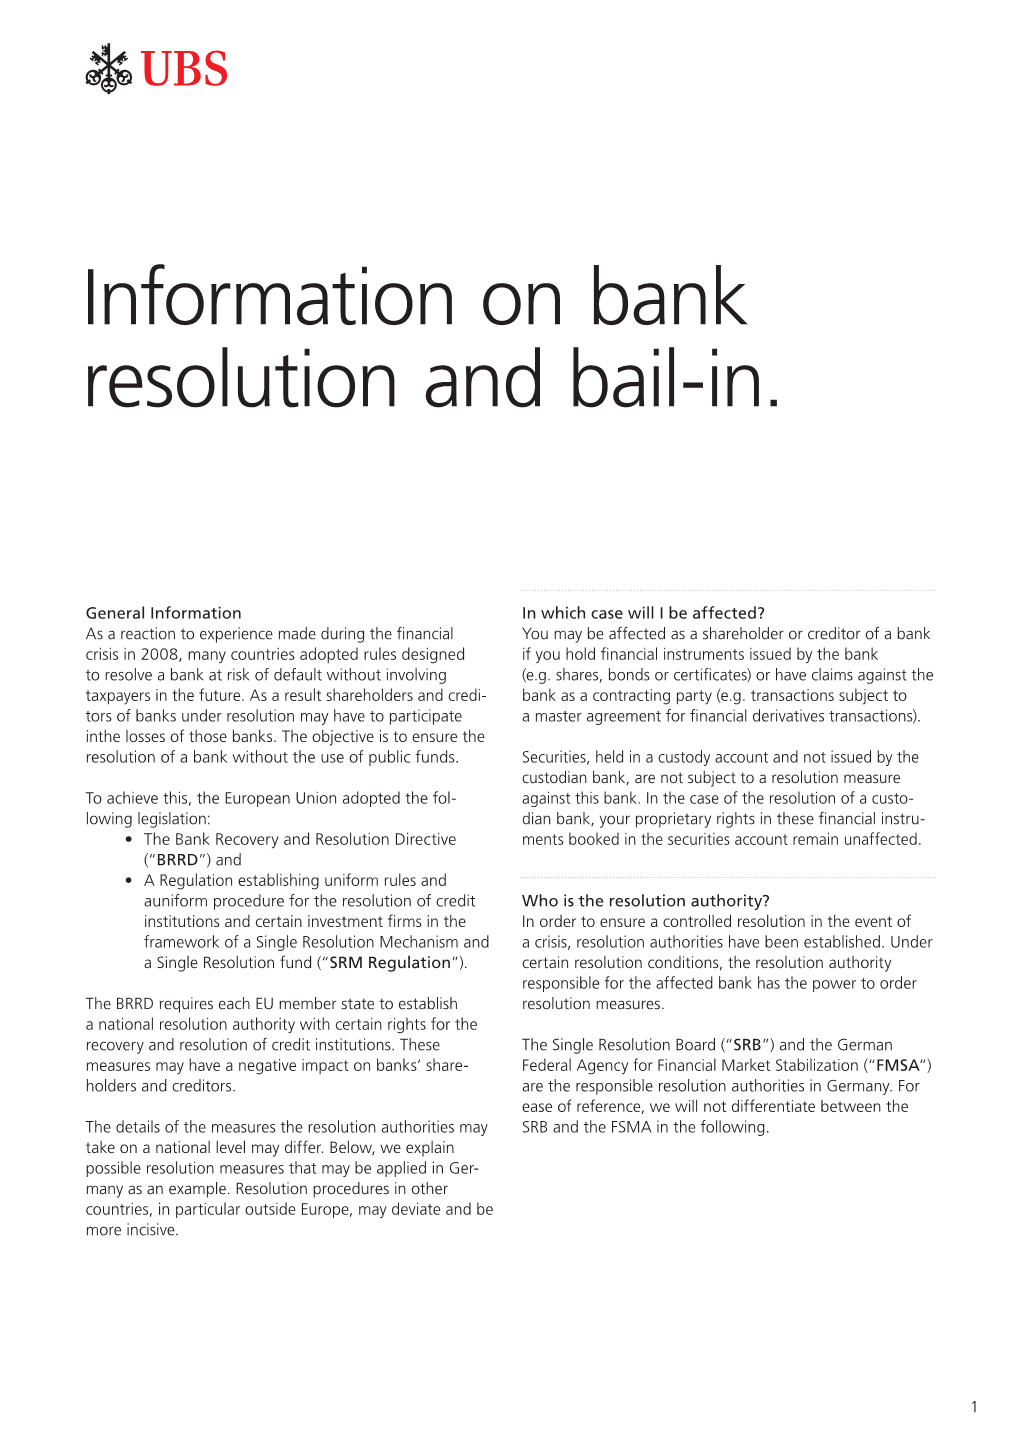 Information on Bank Resolution and Bail-In